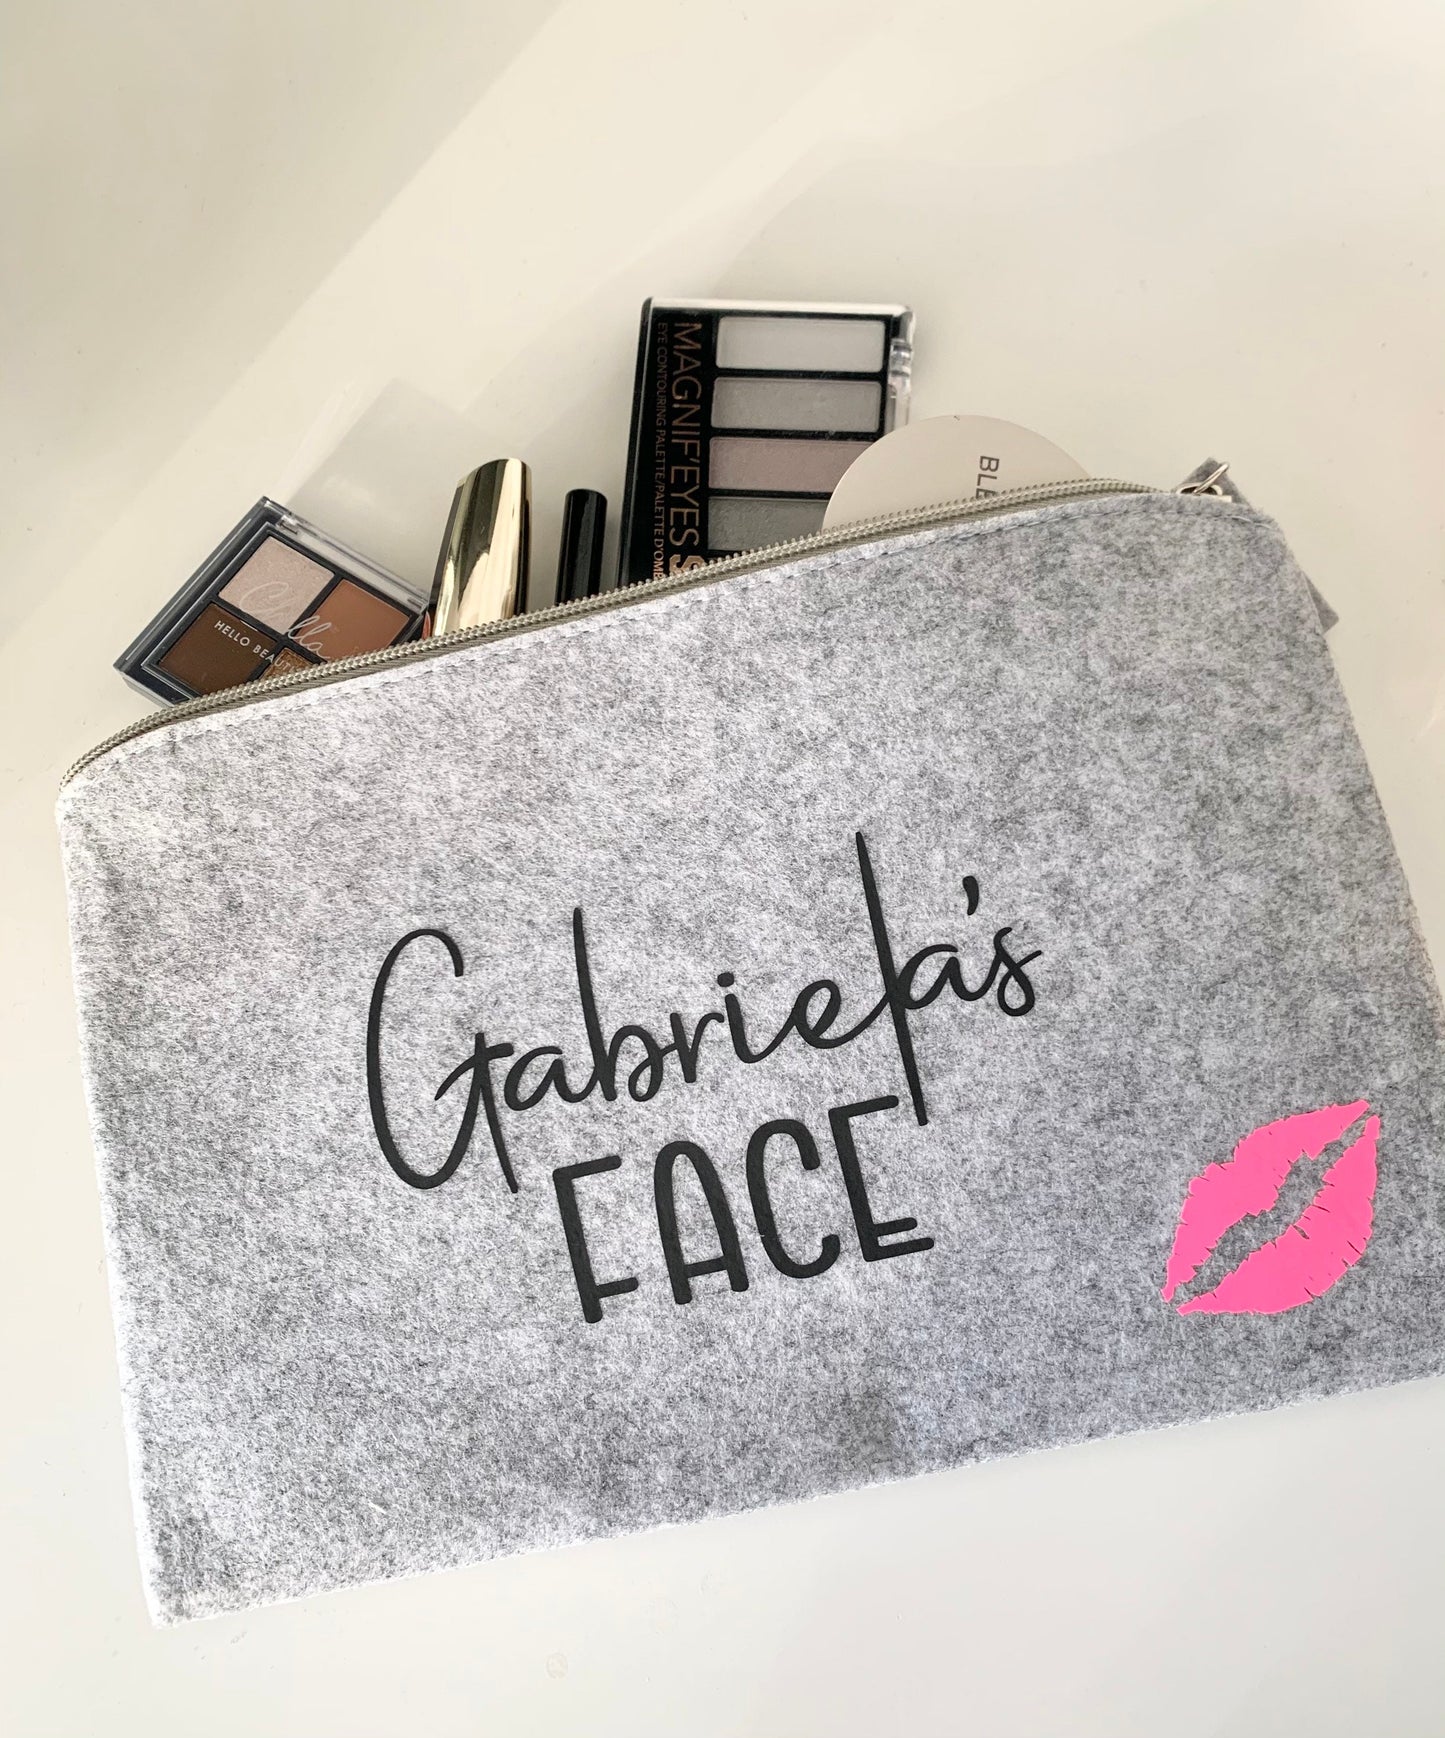 Personalised grey felt make up and toiletry bag, Mother’s Day gift, valentines gift for girlfriend or wife, gifts for mum, bridesmaid gift